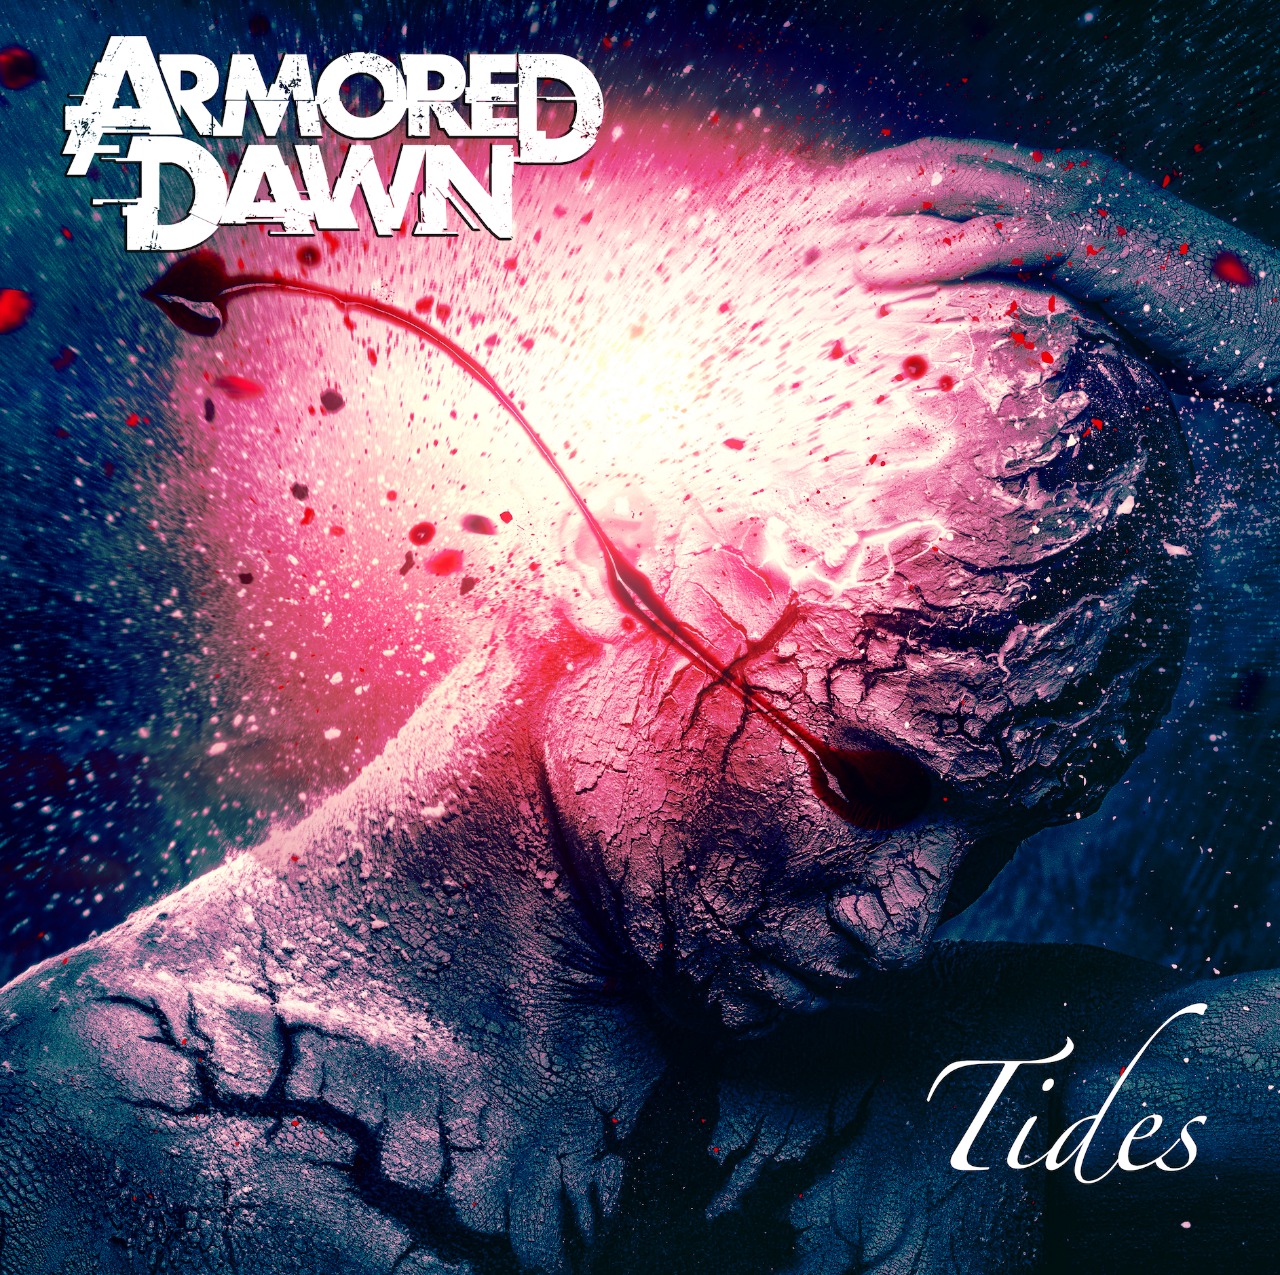 The new single ‘Tides’ from ‘Armored Dawn’ with it’s supersonic guitars and metal prowess is on the playlist now.